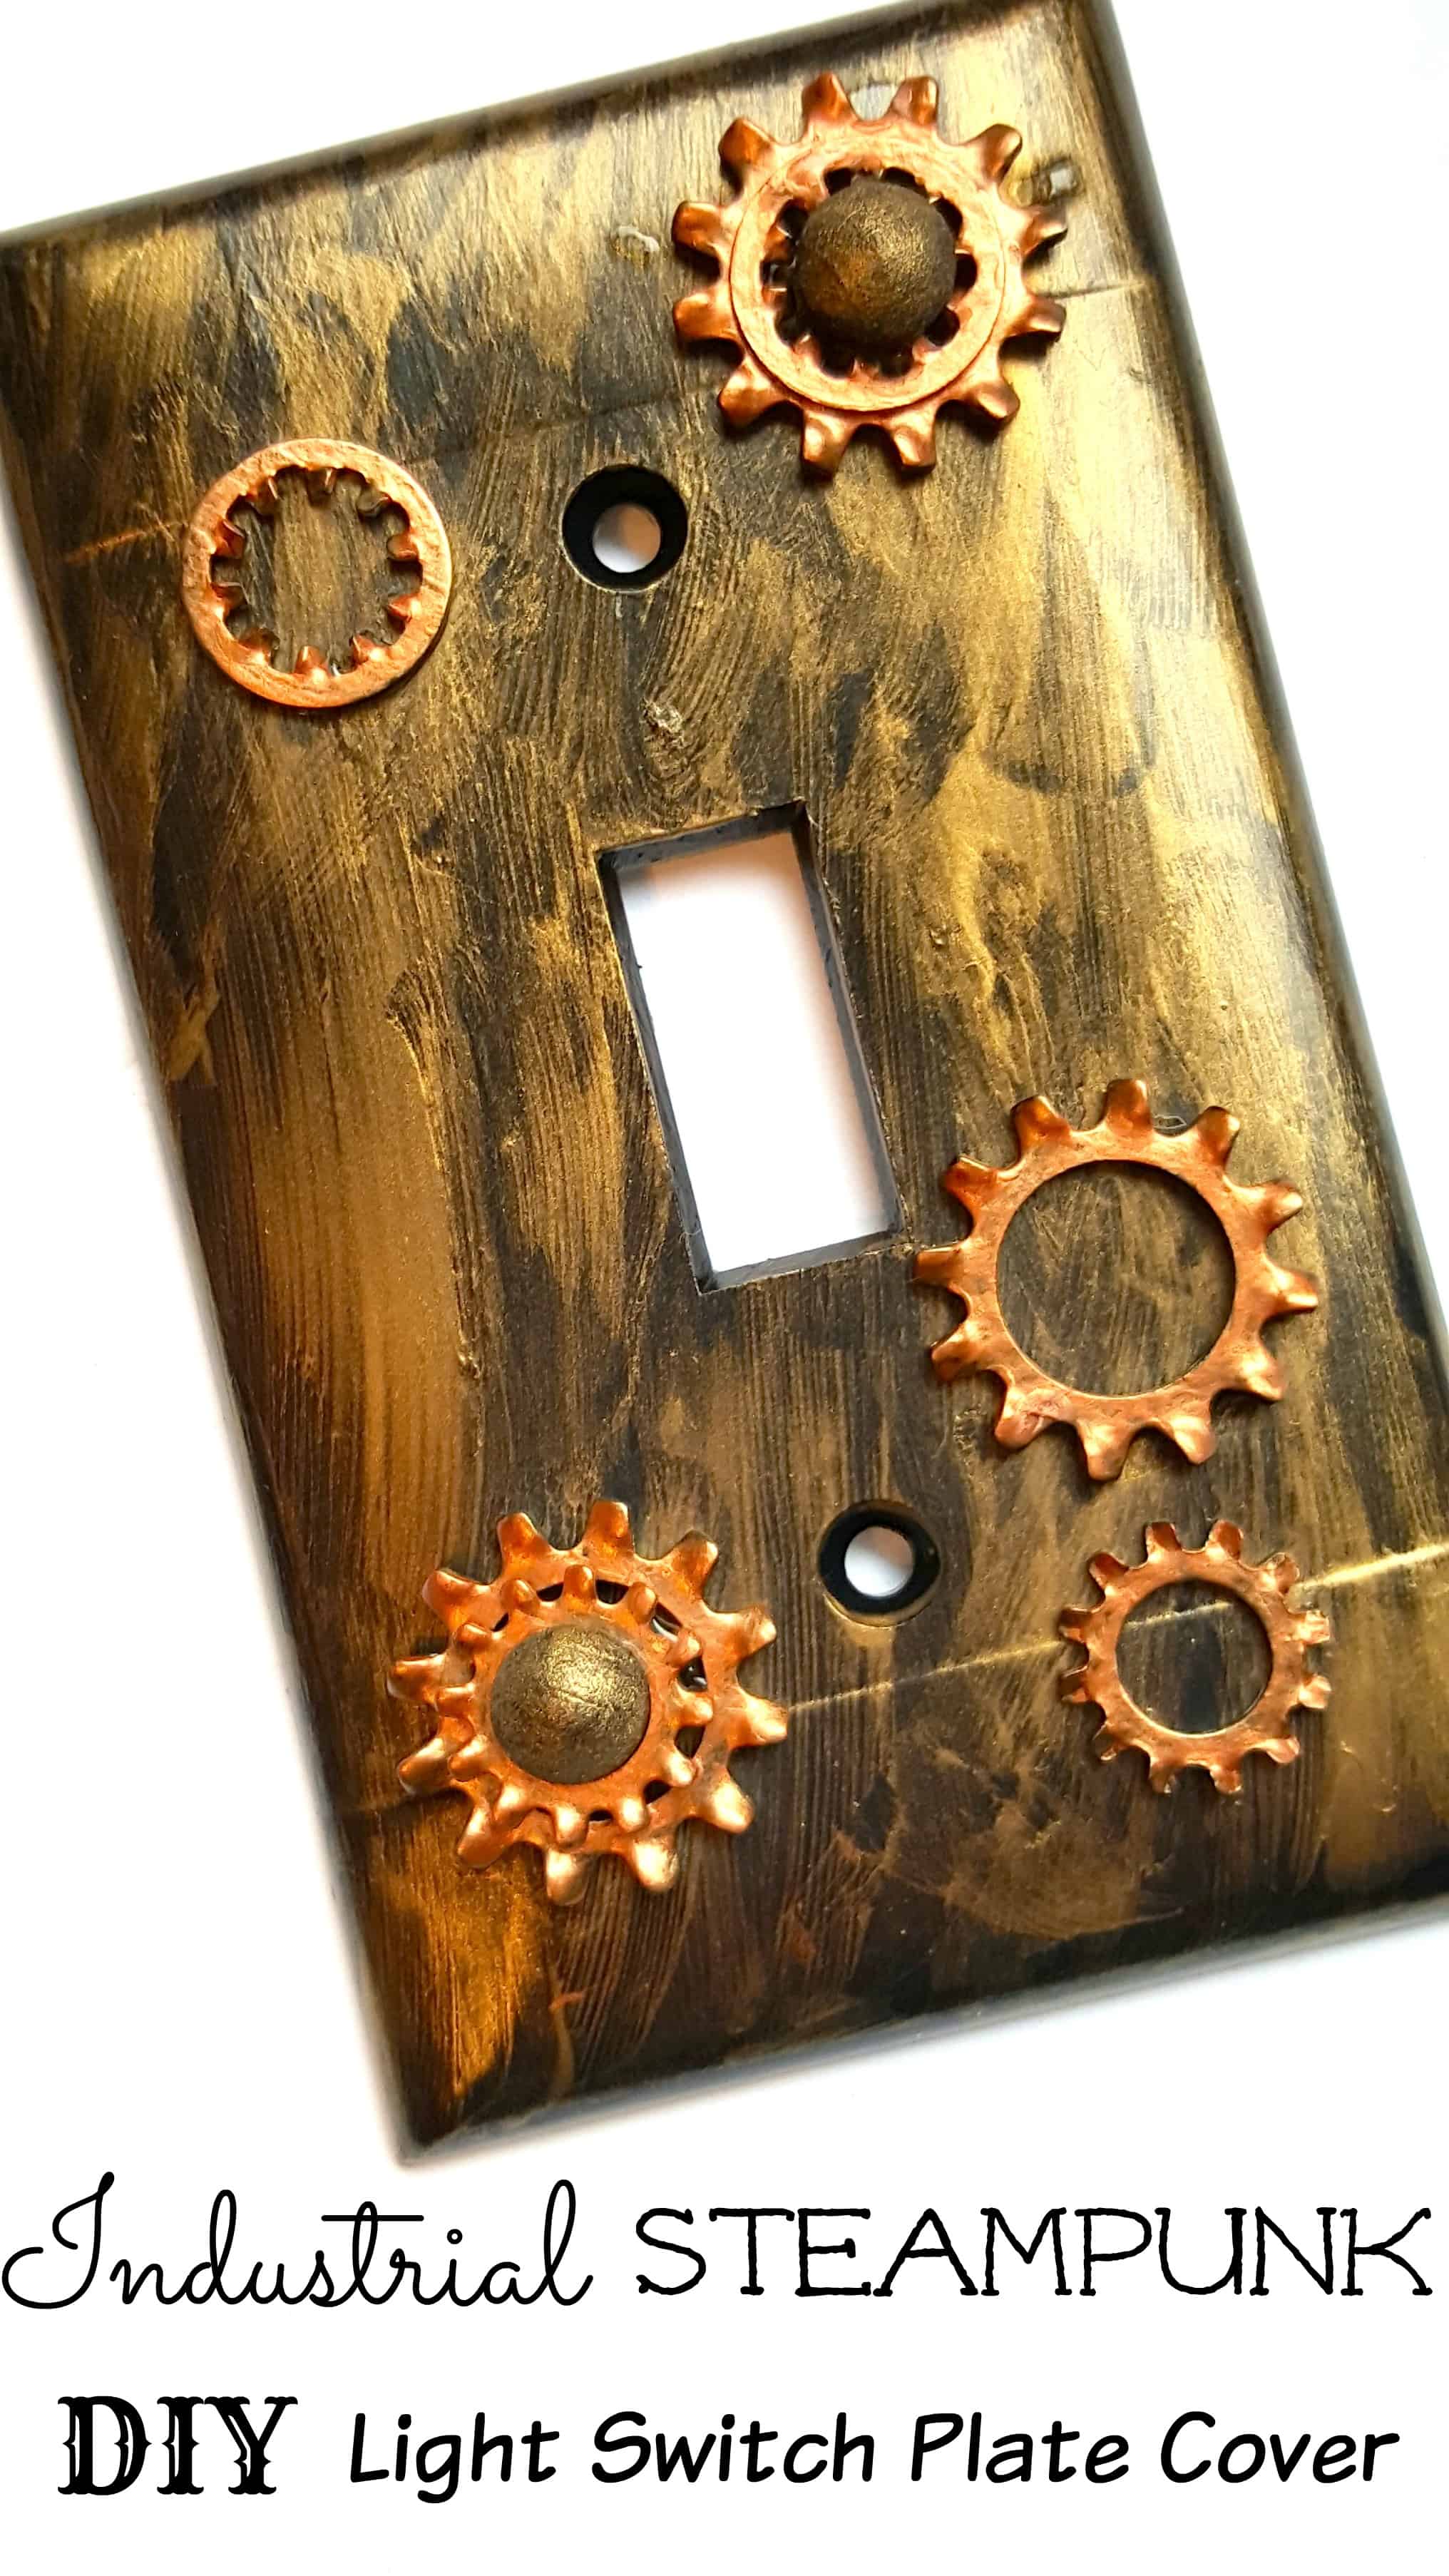 DIY Industrial Steampunk Gears Light Switch Plate Cover